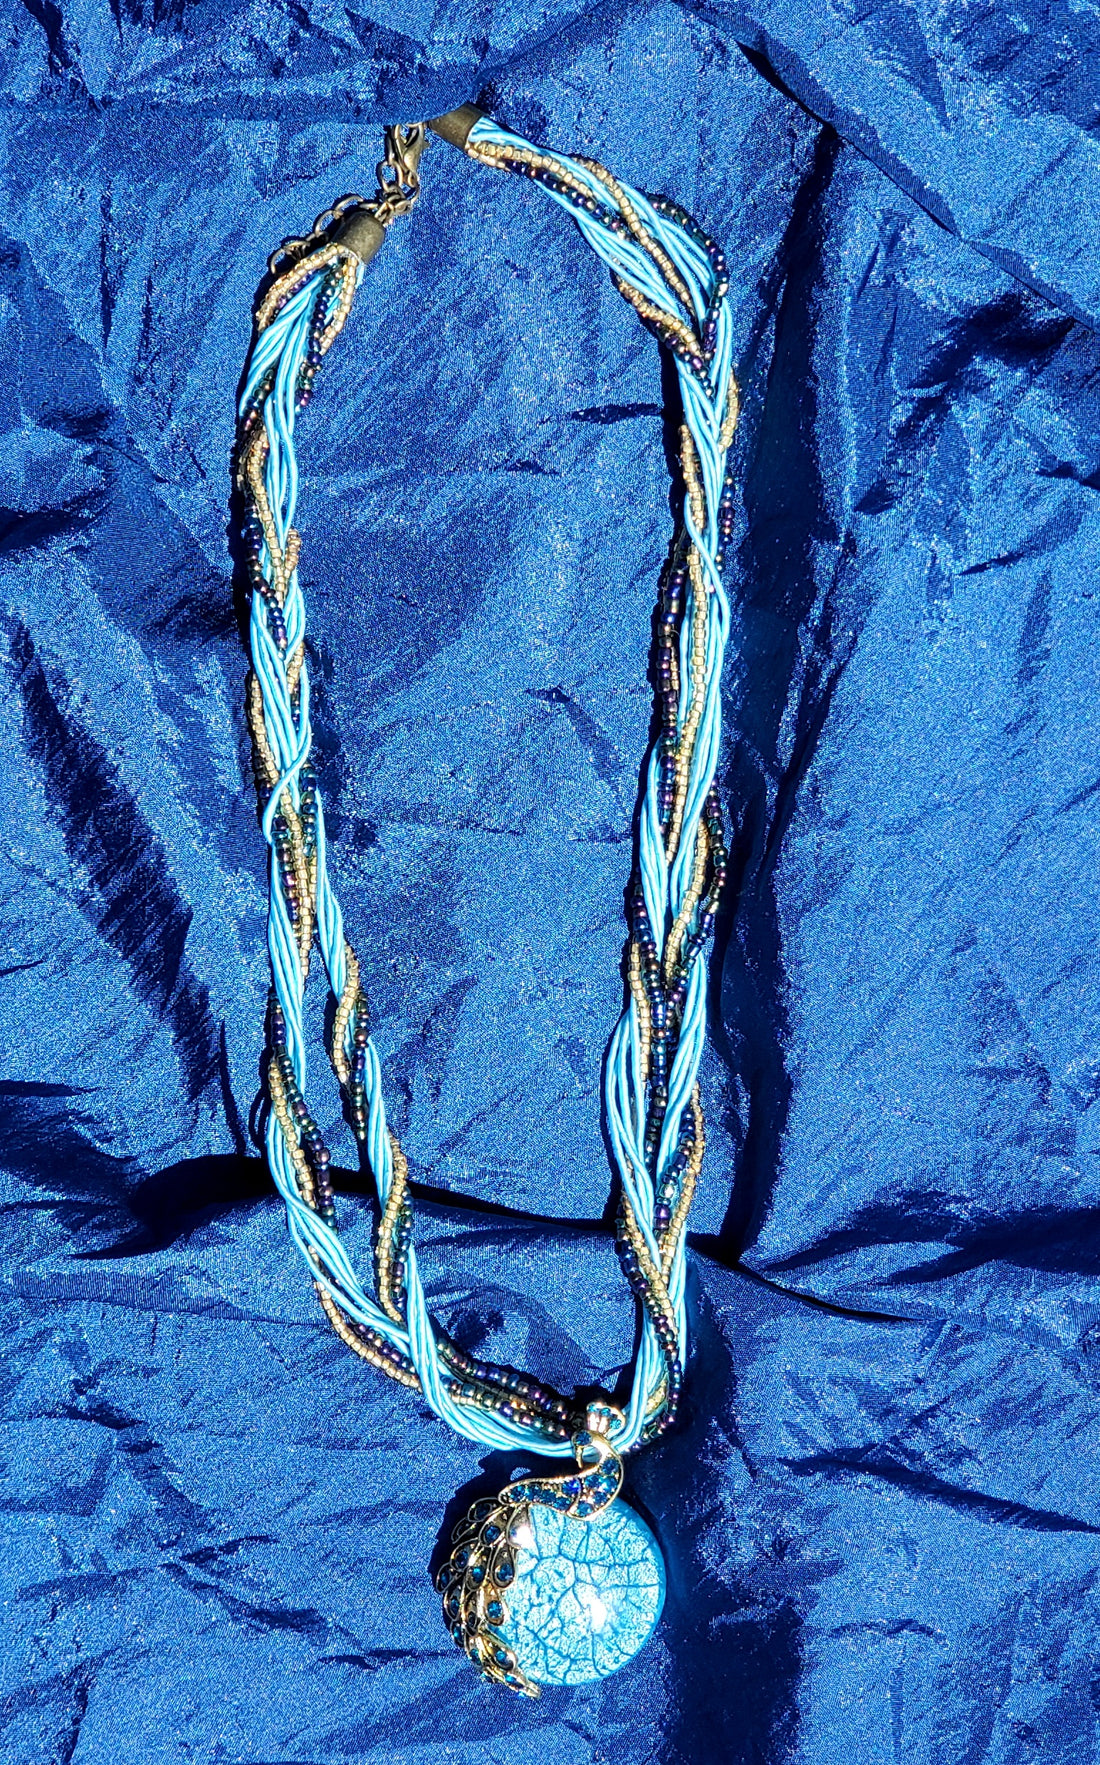 Blue Peacock Necklace - 18" w/Braided Silk Cord, Rhinestone, and Glass Cabachon